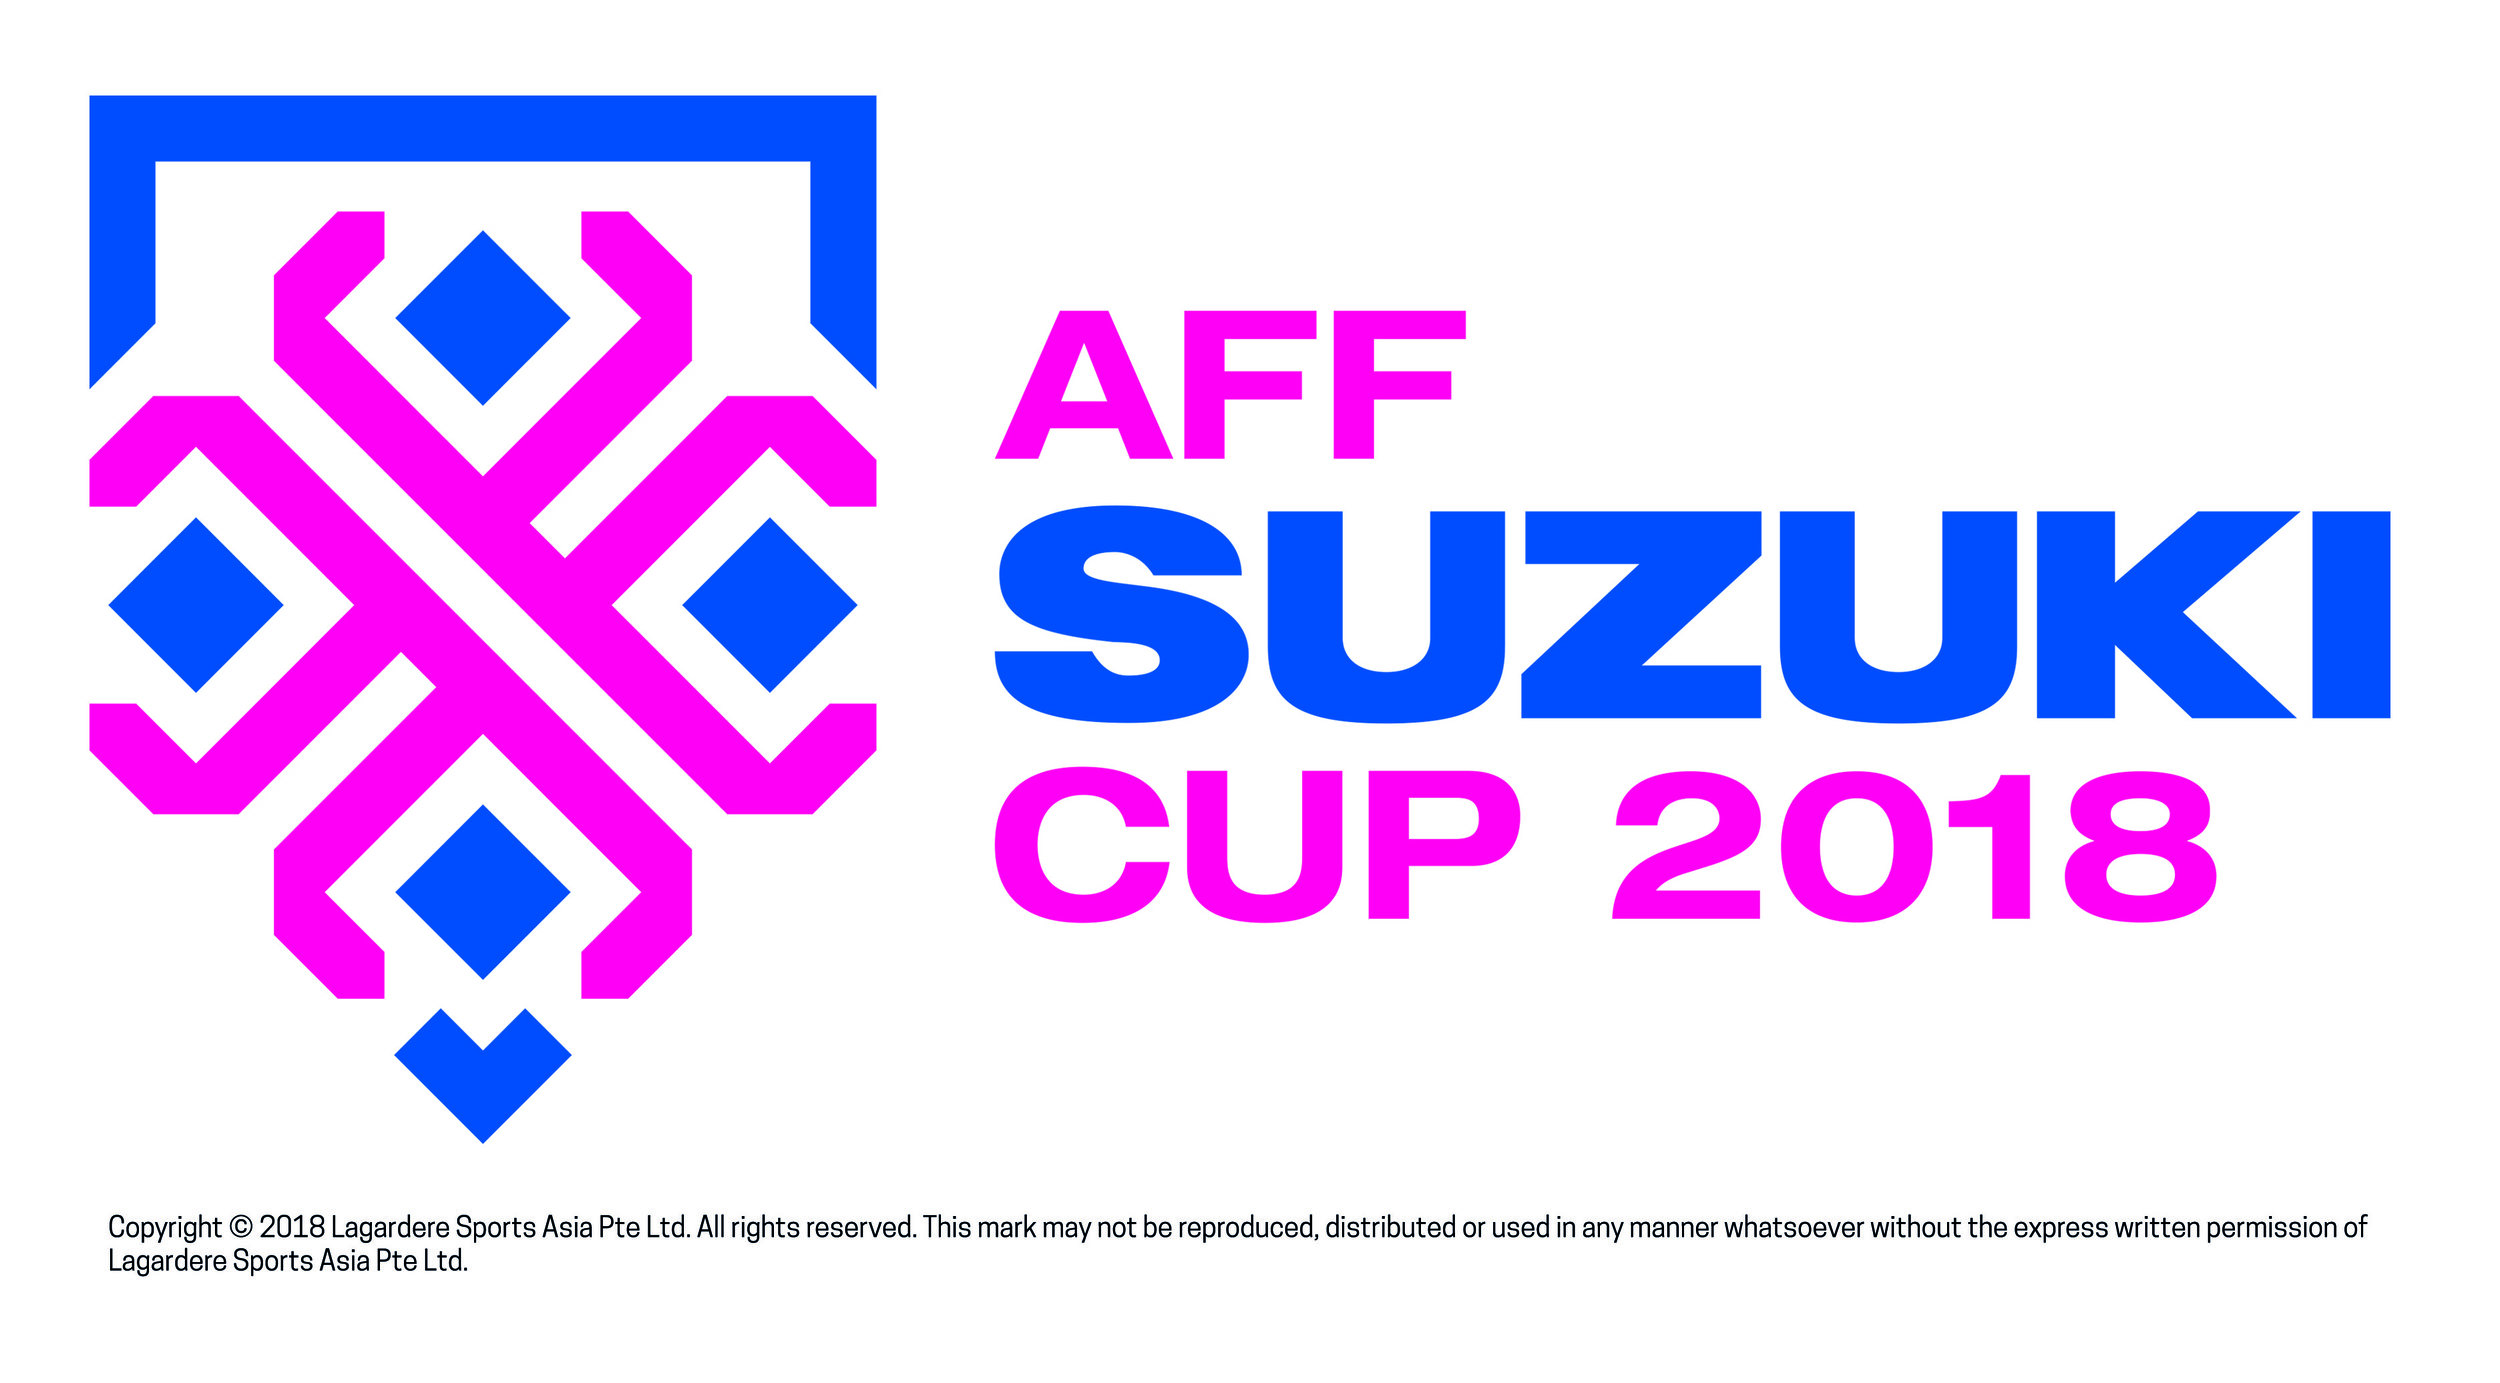 Aff Suzuki Cup 2018 Soars To Greater Heights With Airasia Airasia Newsroom